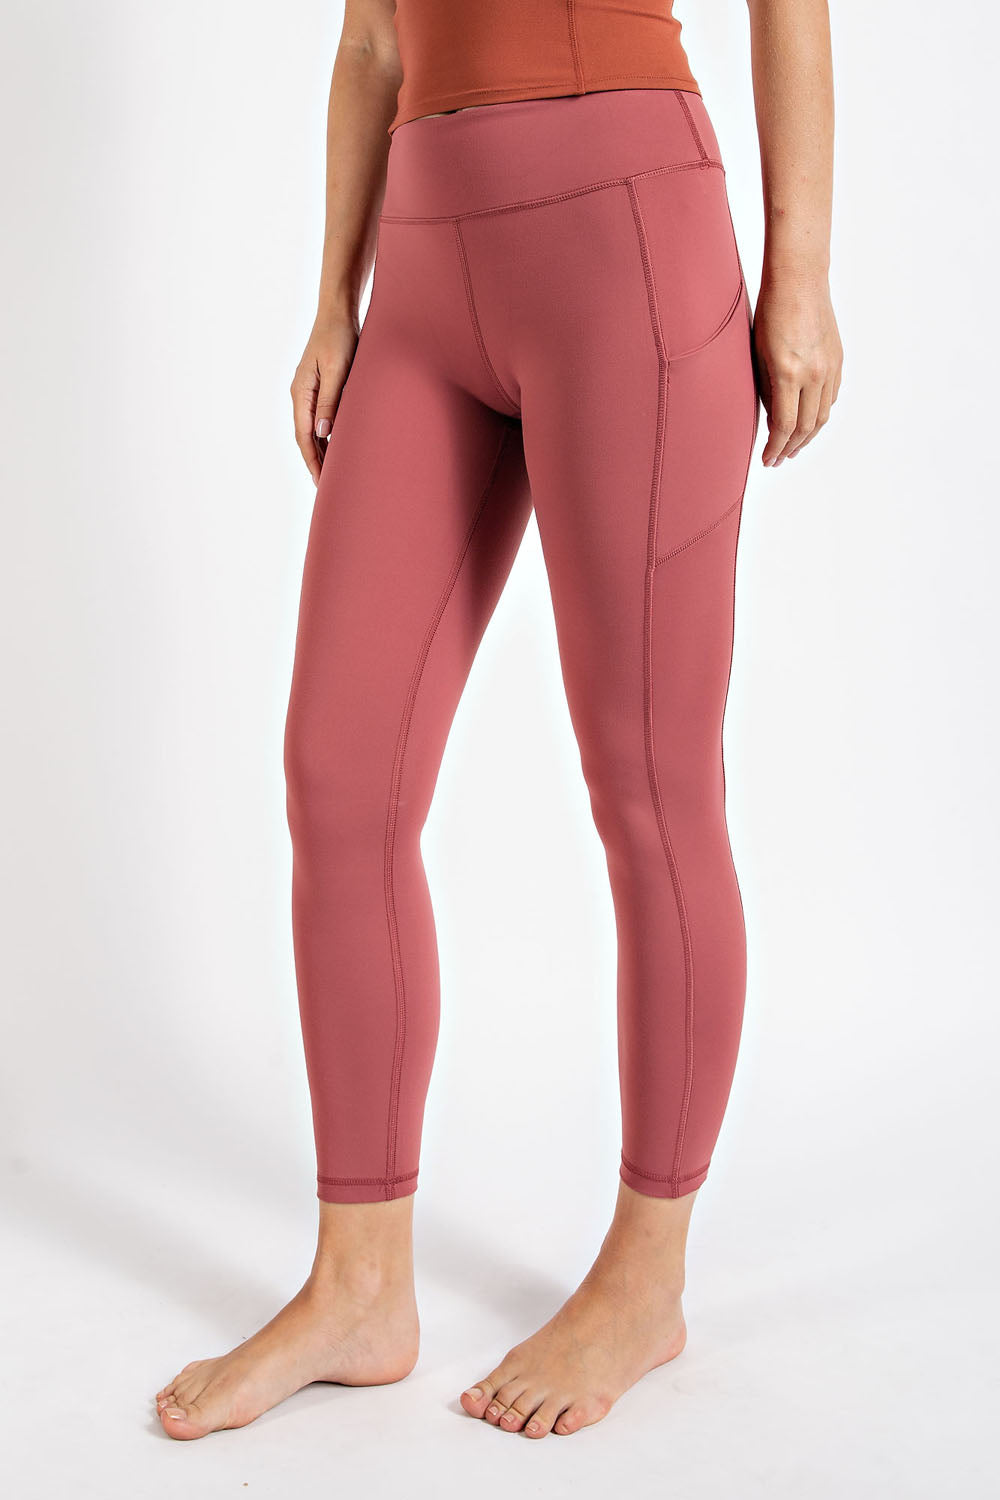 Clay - Butter Soft Leggings